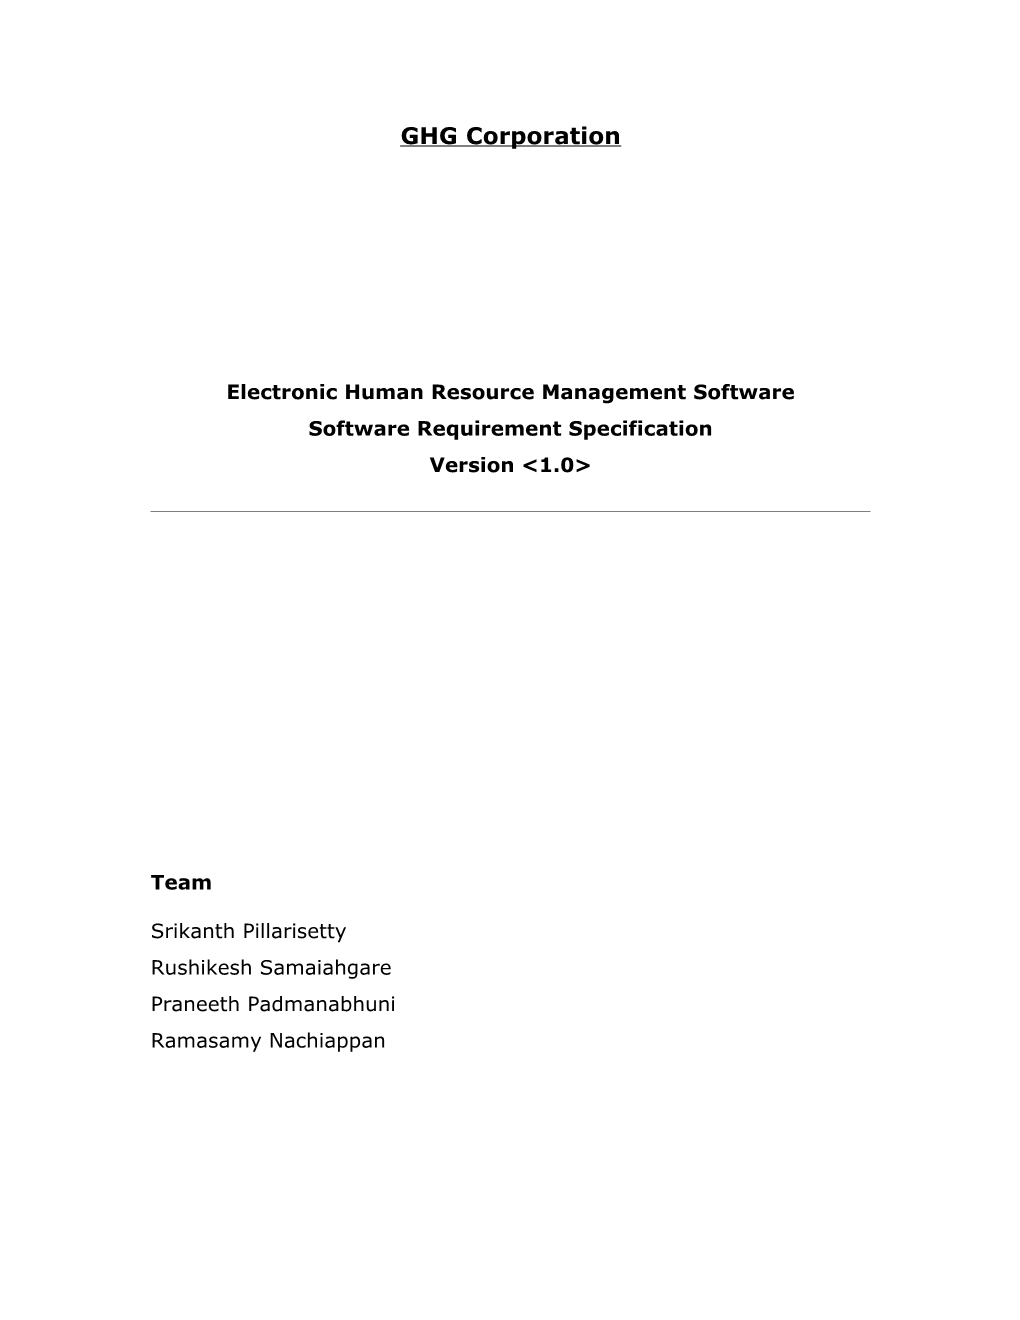 Electronic Human Resource Management Software